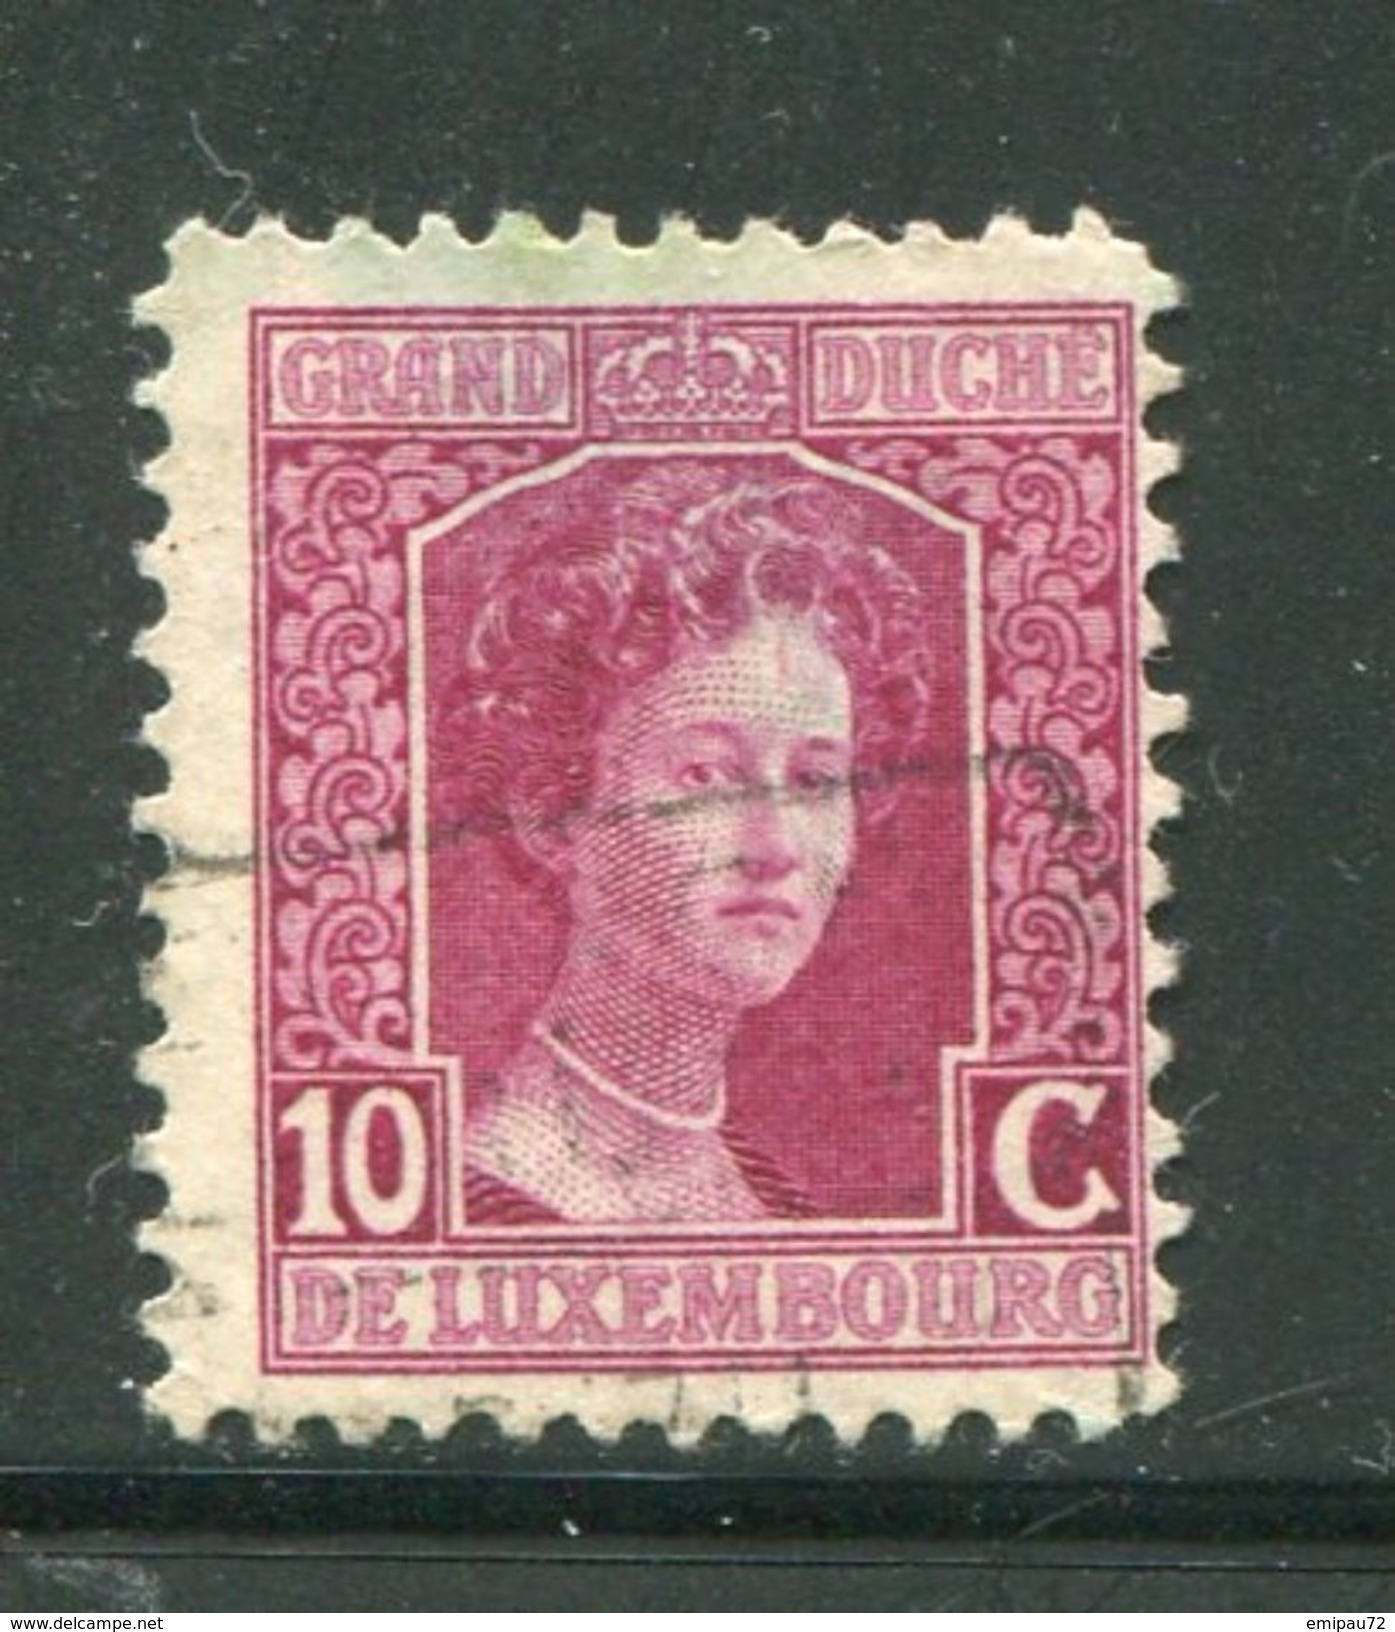 LUXEMBOURG- Y&T N°95- Oblitéré - 1914-24 Marie-Adelaide